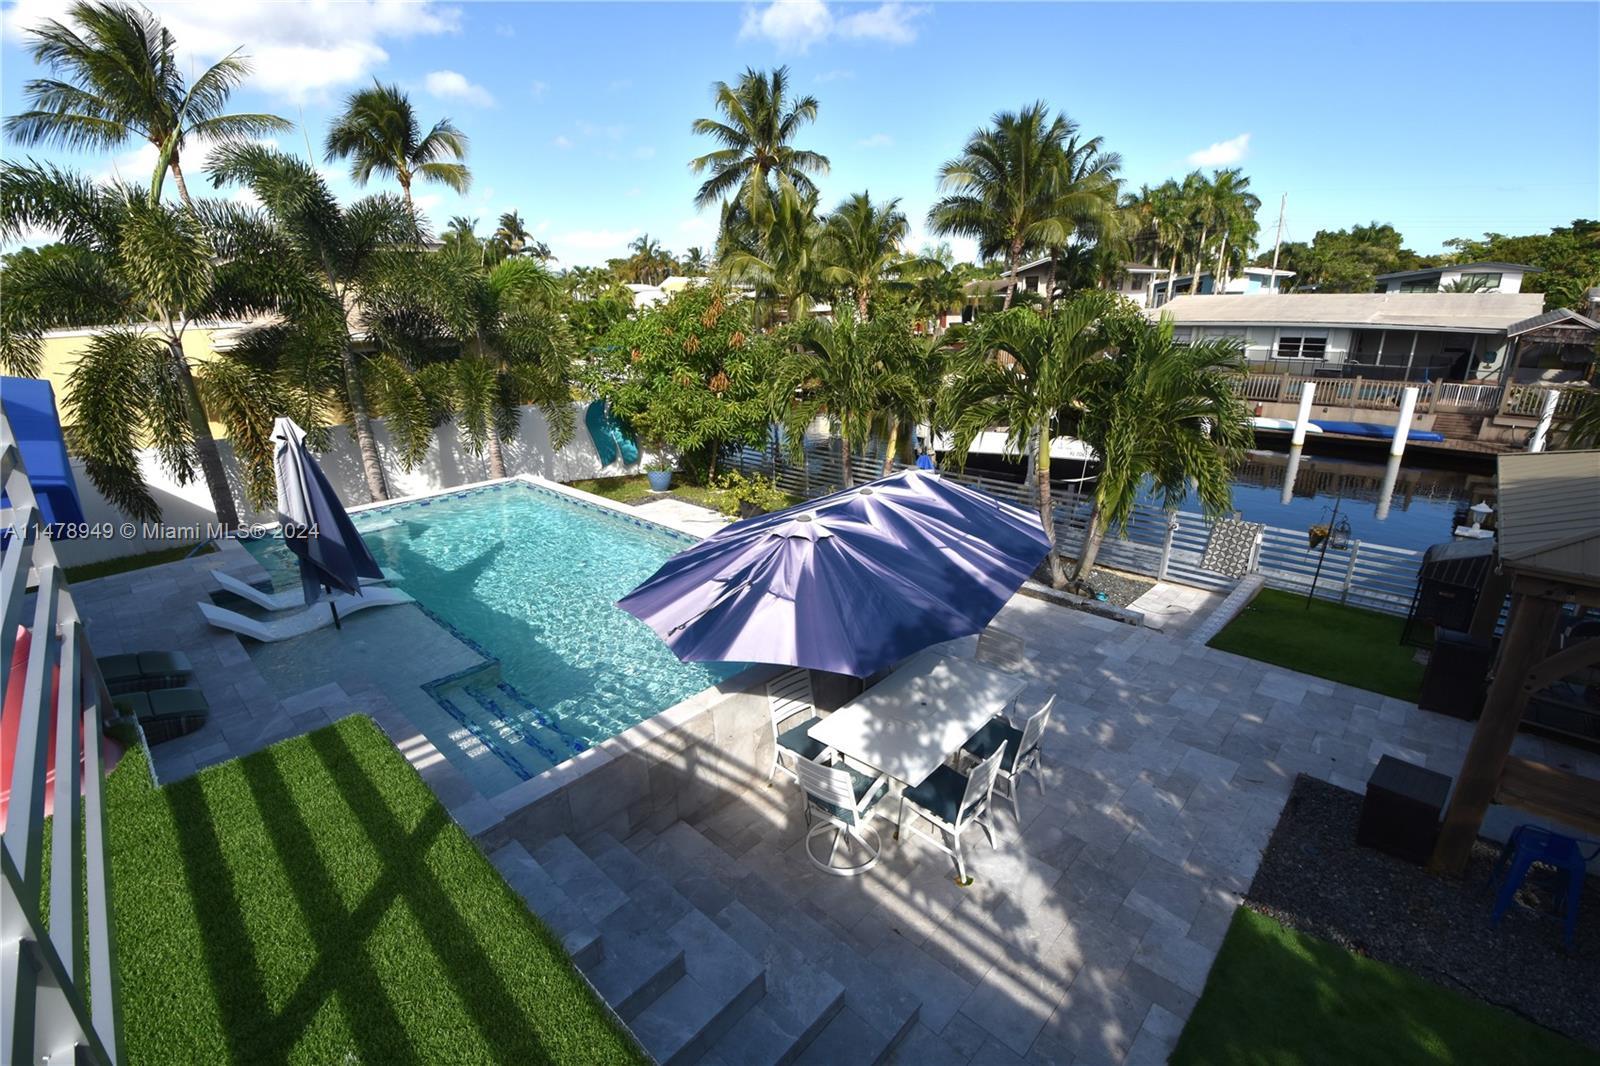 RIVERLAND! One of Ft. Lauderdale's most sought after water communities. Intercoastal/Ocean Access.  